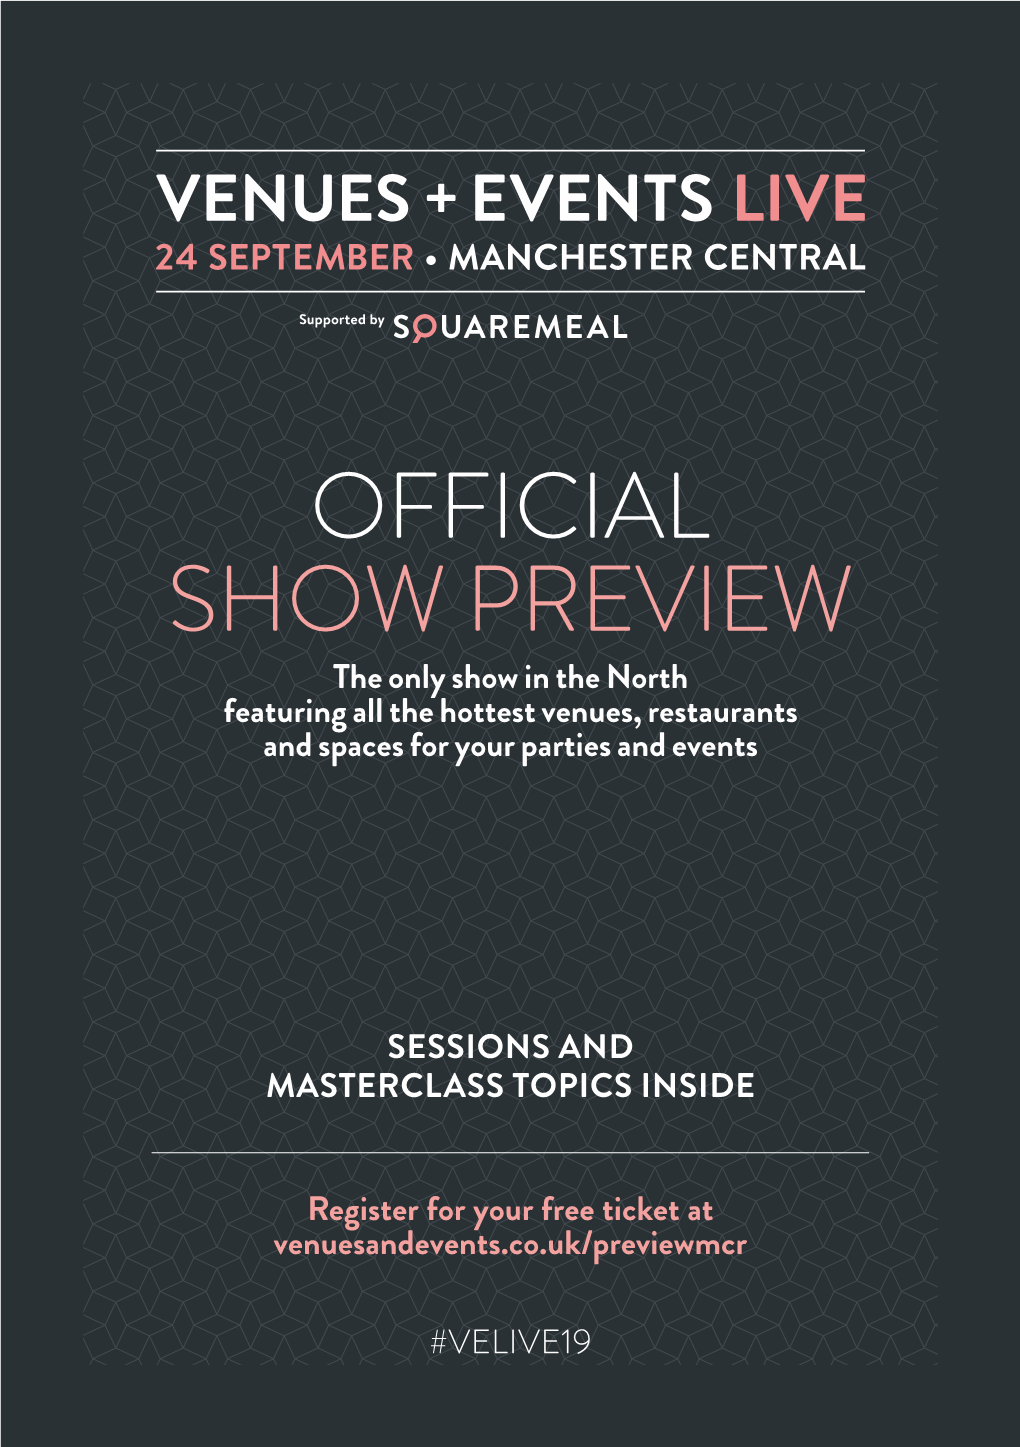 OFFICIAL SHOW PREVIEW the Only Show in the North Featuring All the Hottest Venues, Restaurants and Spaces for Your Parties and Events